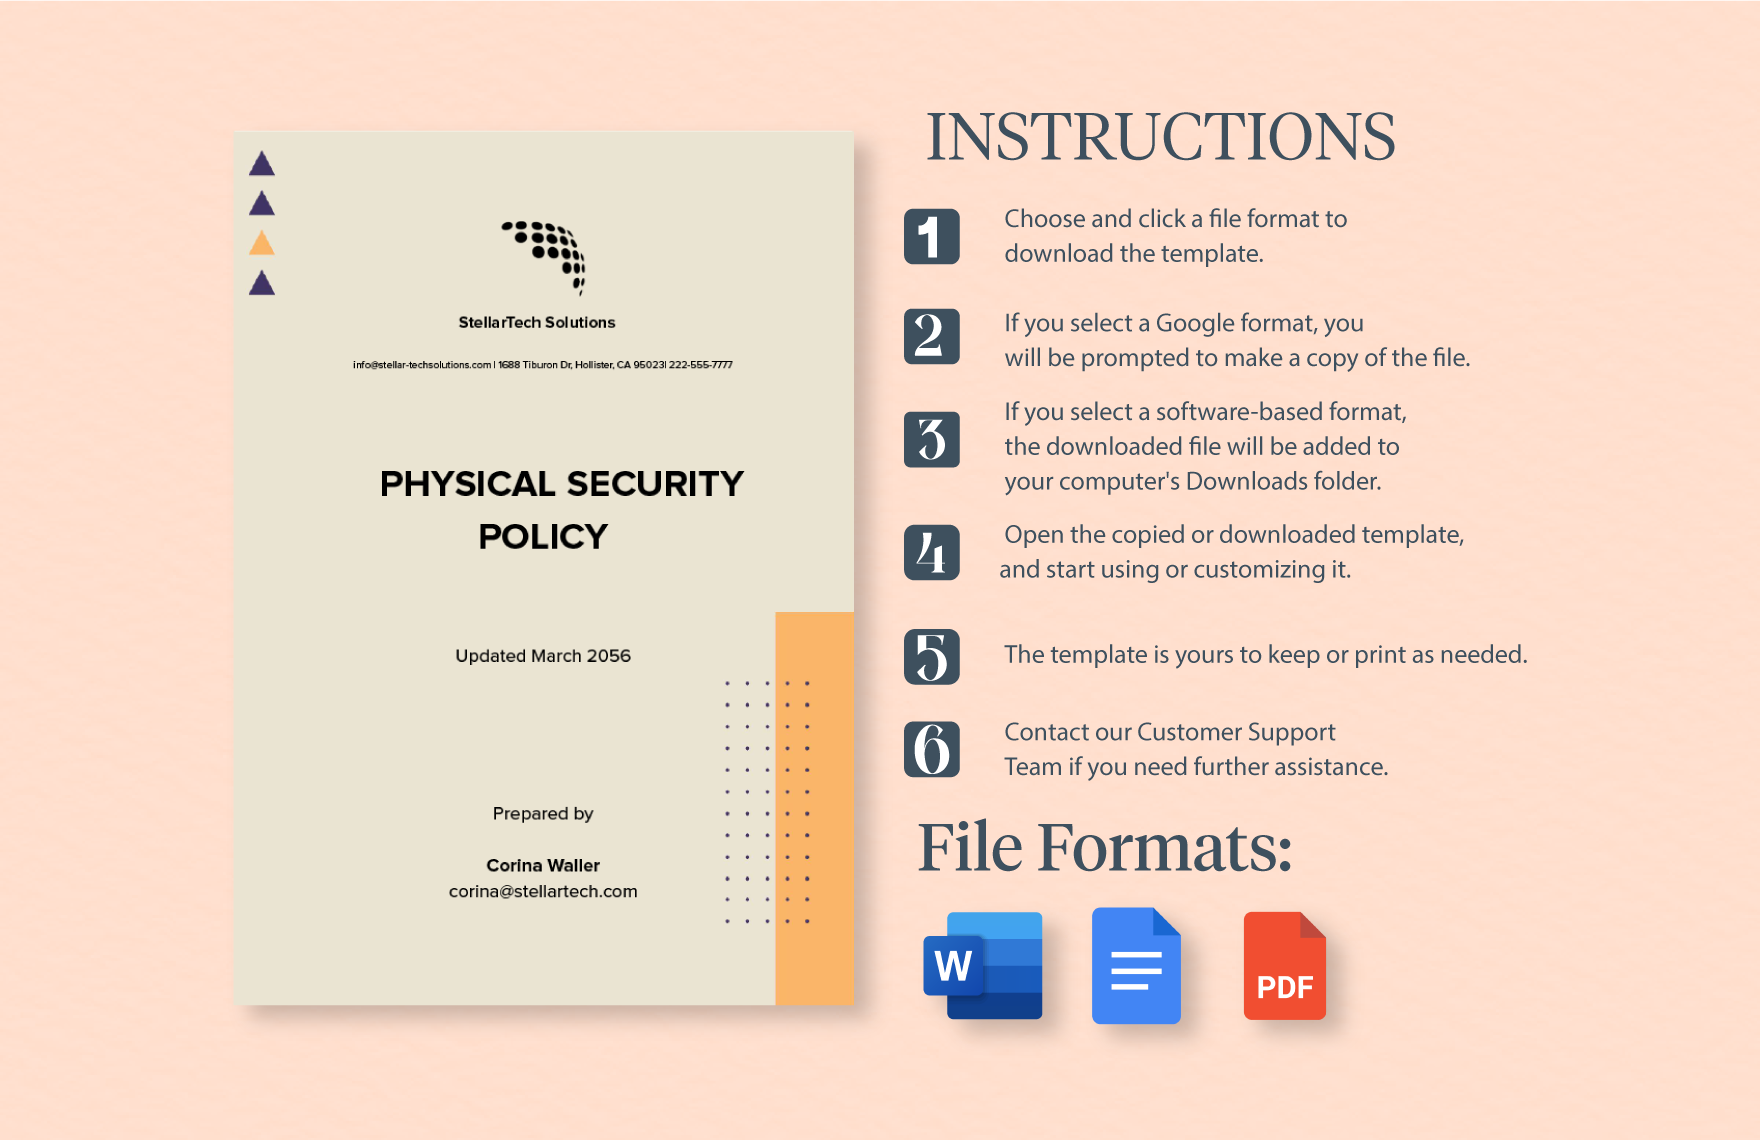 Physical Security Policy Template